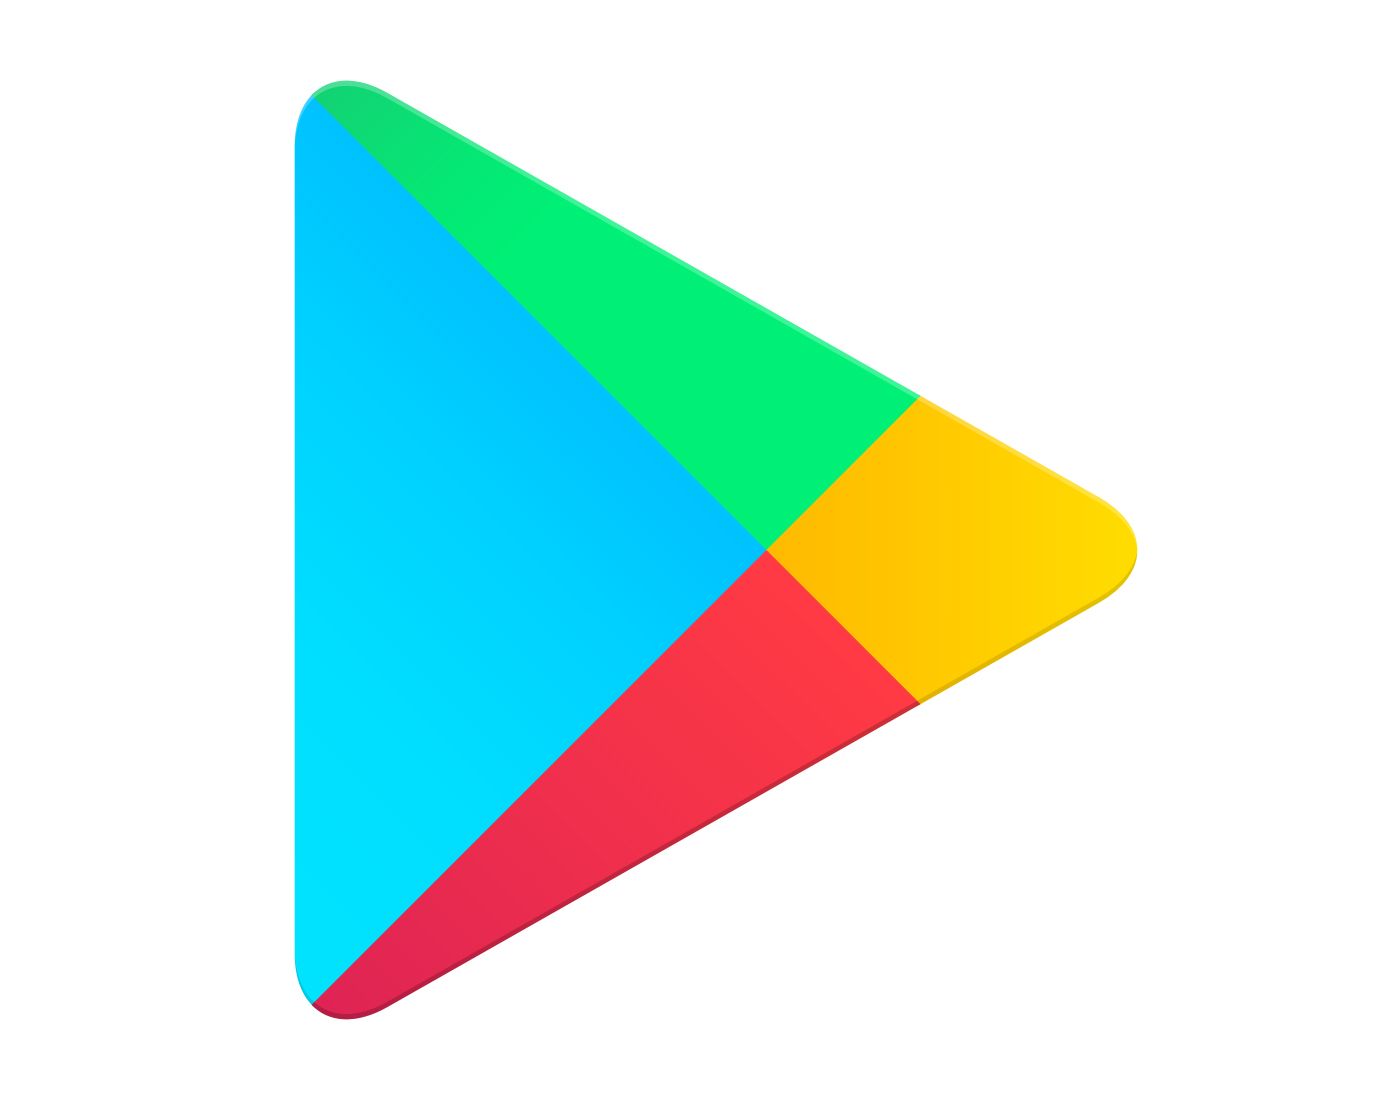 Google Play Store APK Download and Install the Latest